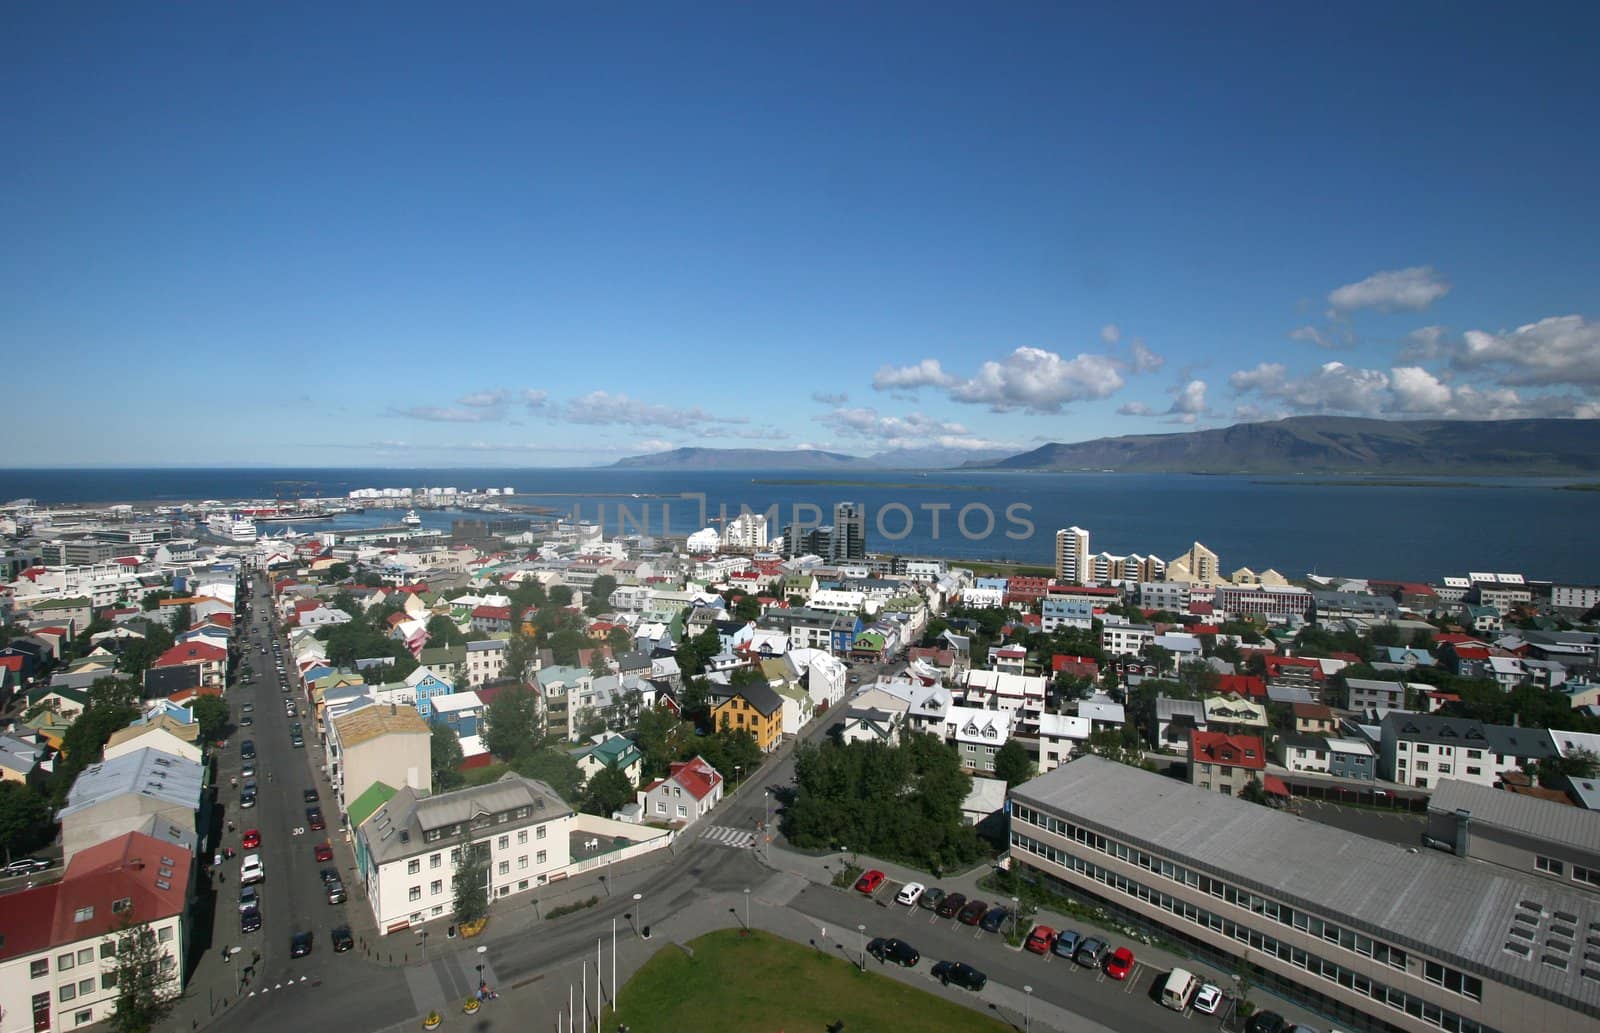 Aerial view of Reykjavik city overlooking the harbor and Mt. Esja